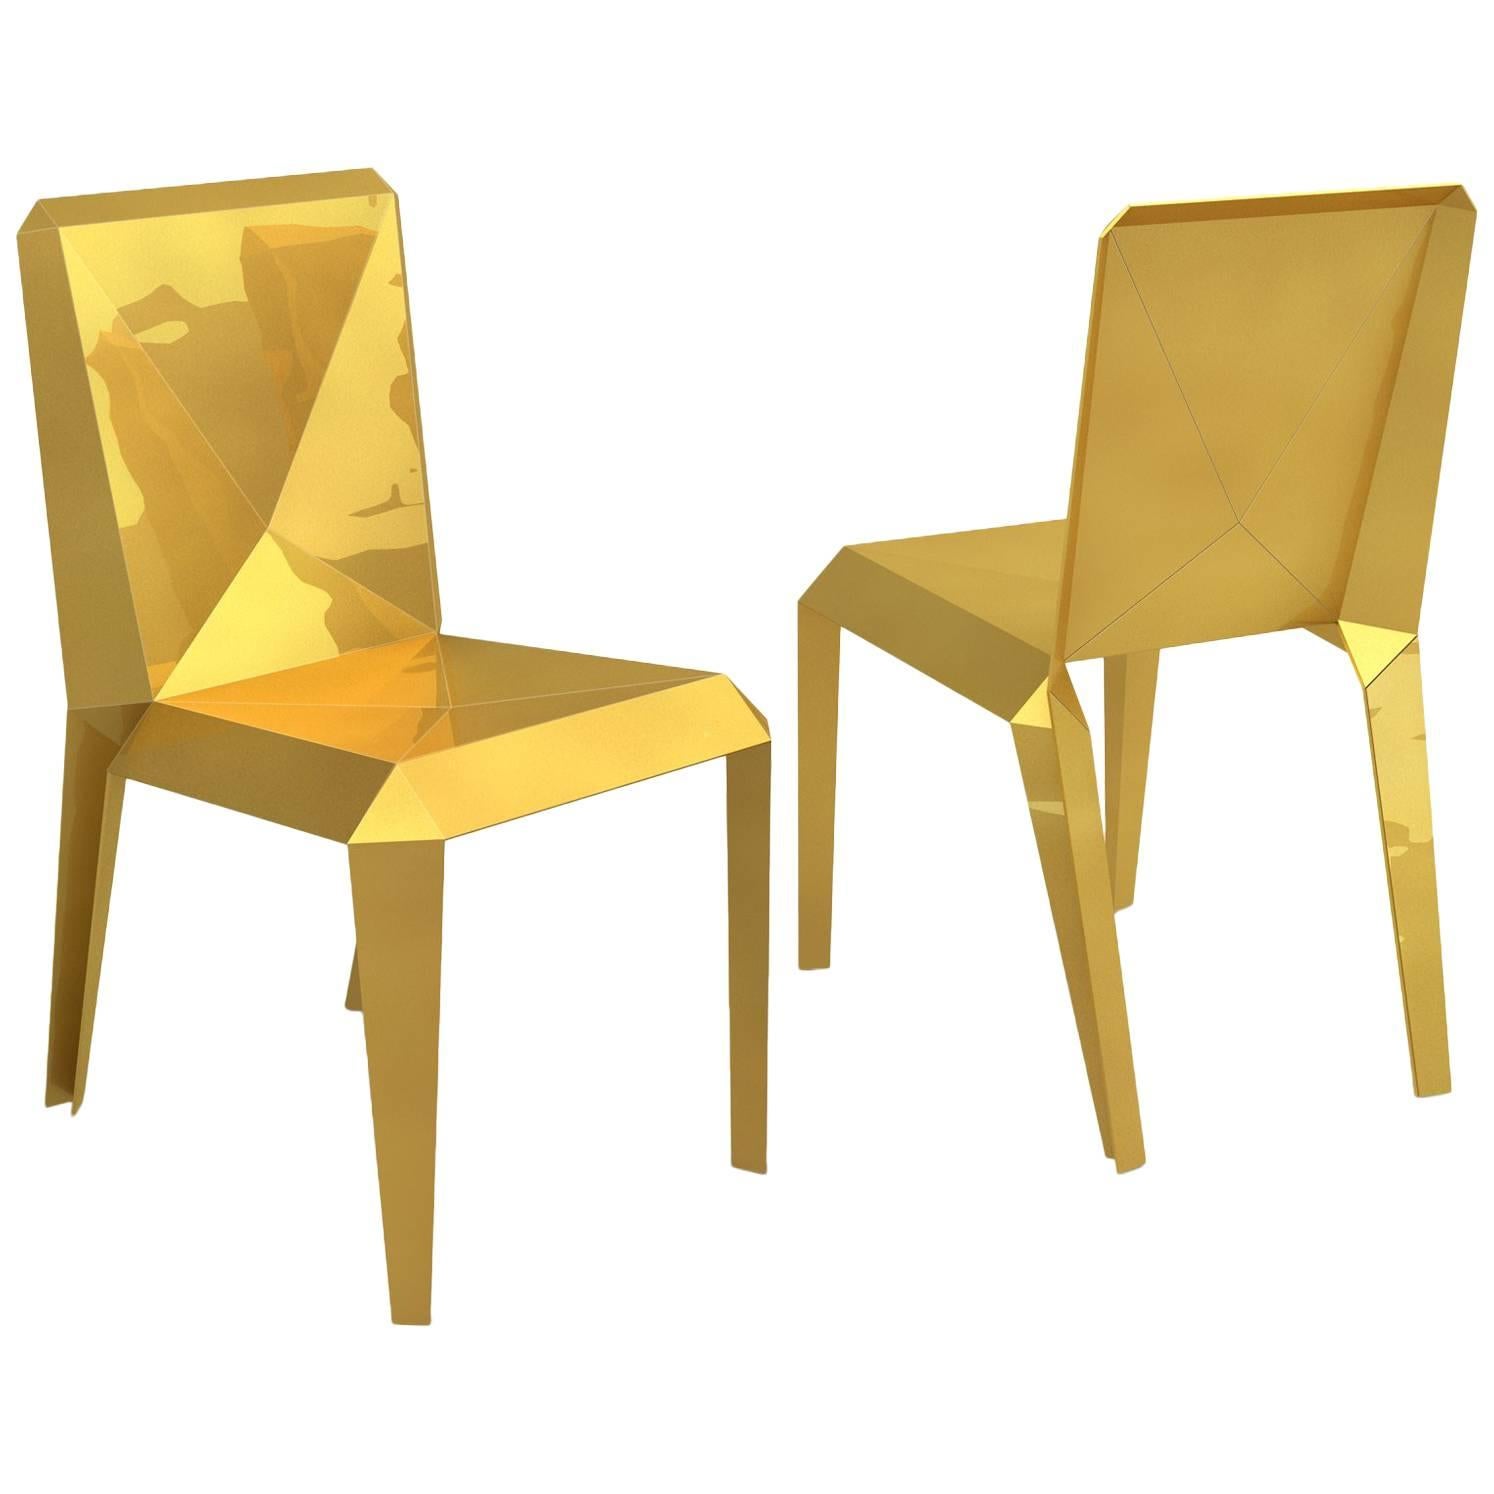 The exclusive and polyhedral chair, created to embellish and enlighten every days life, also recalls the typical gold bar facets.

Pricing excludes VAT.